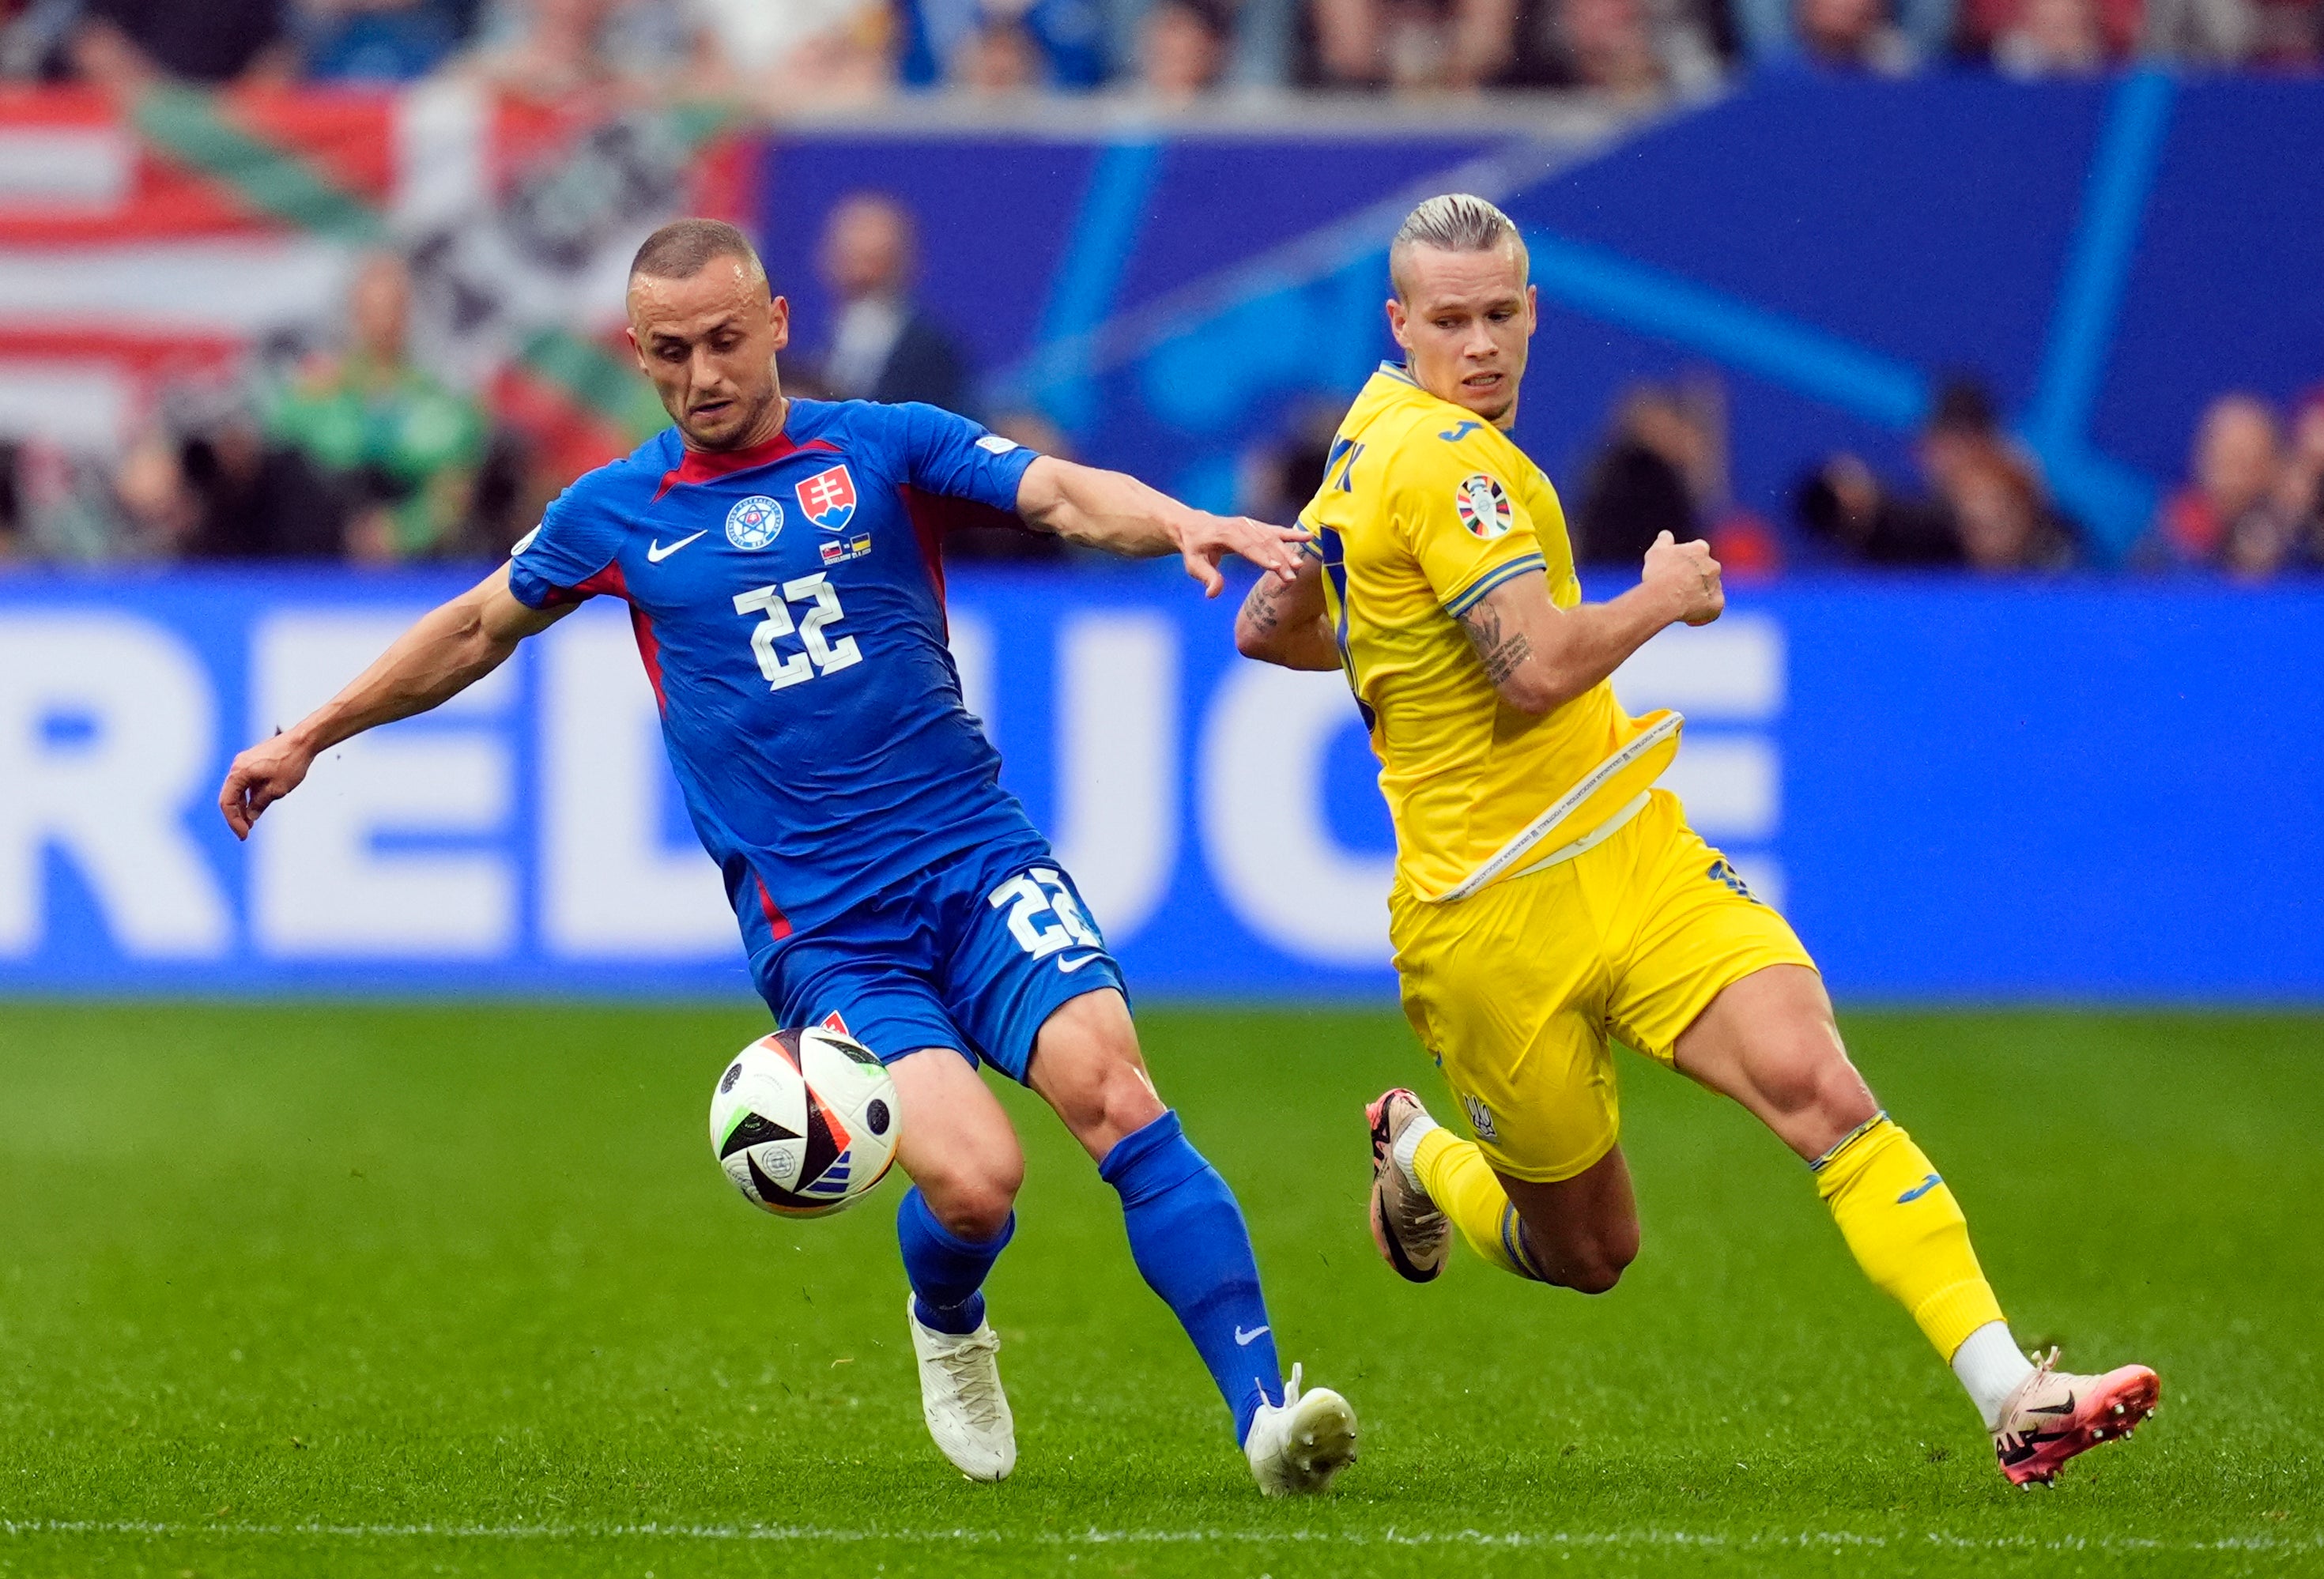 Midfielder Stanislav Lobotka has benefitted from Slovakia’s more intense playing style.